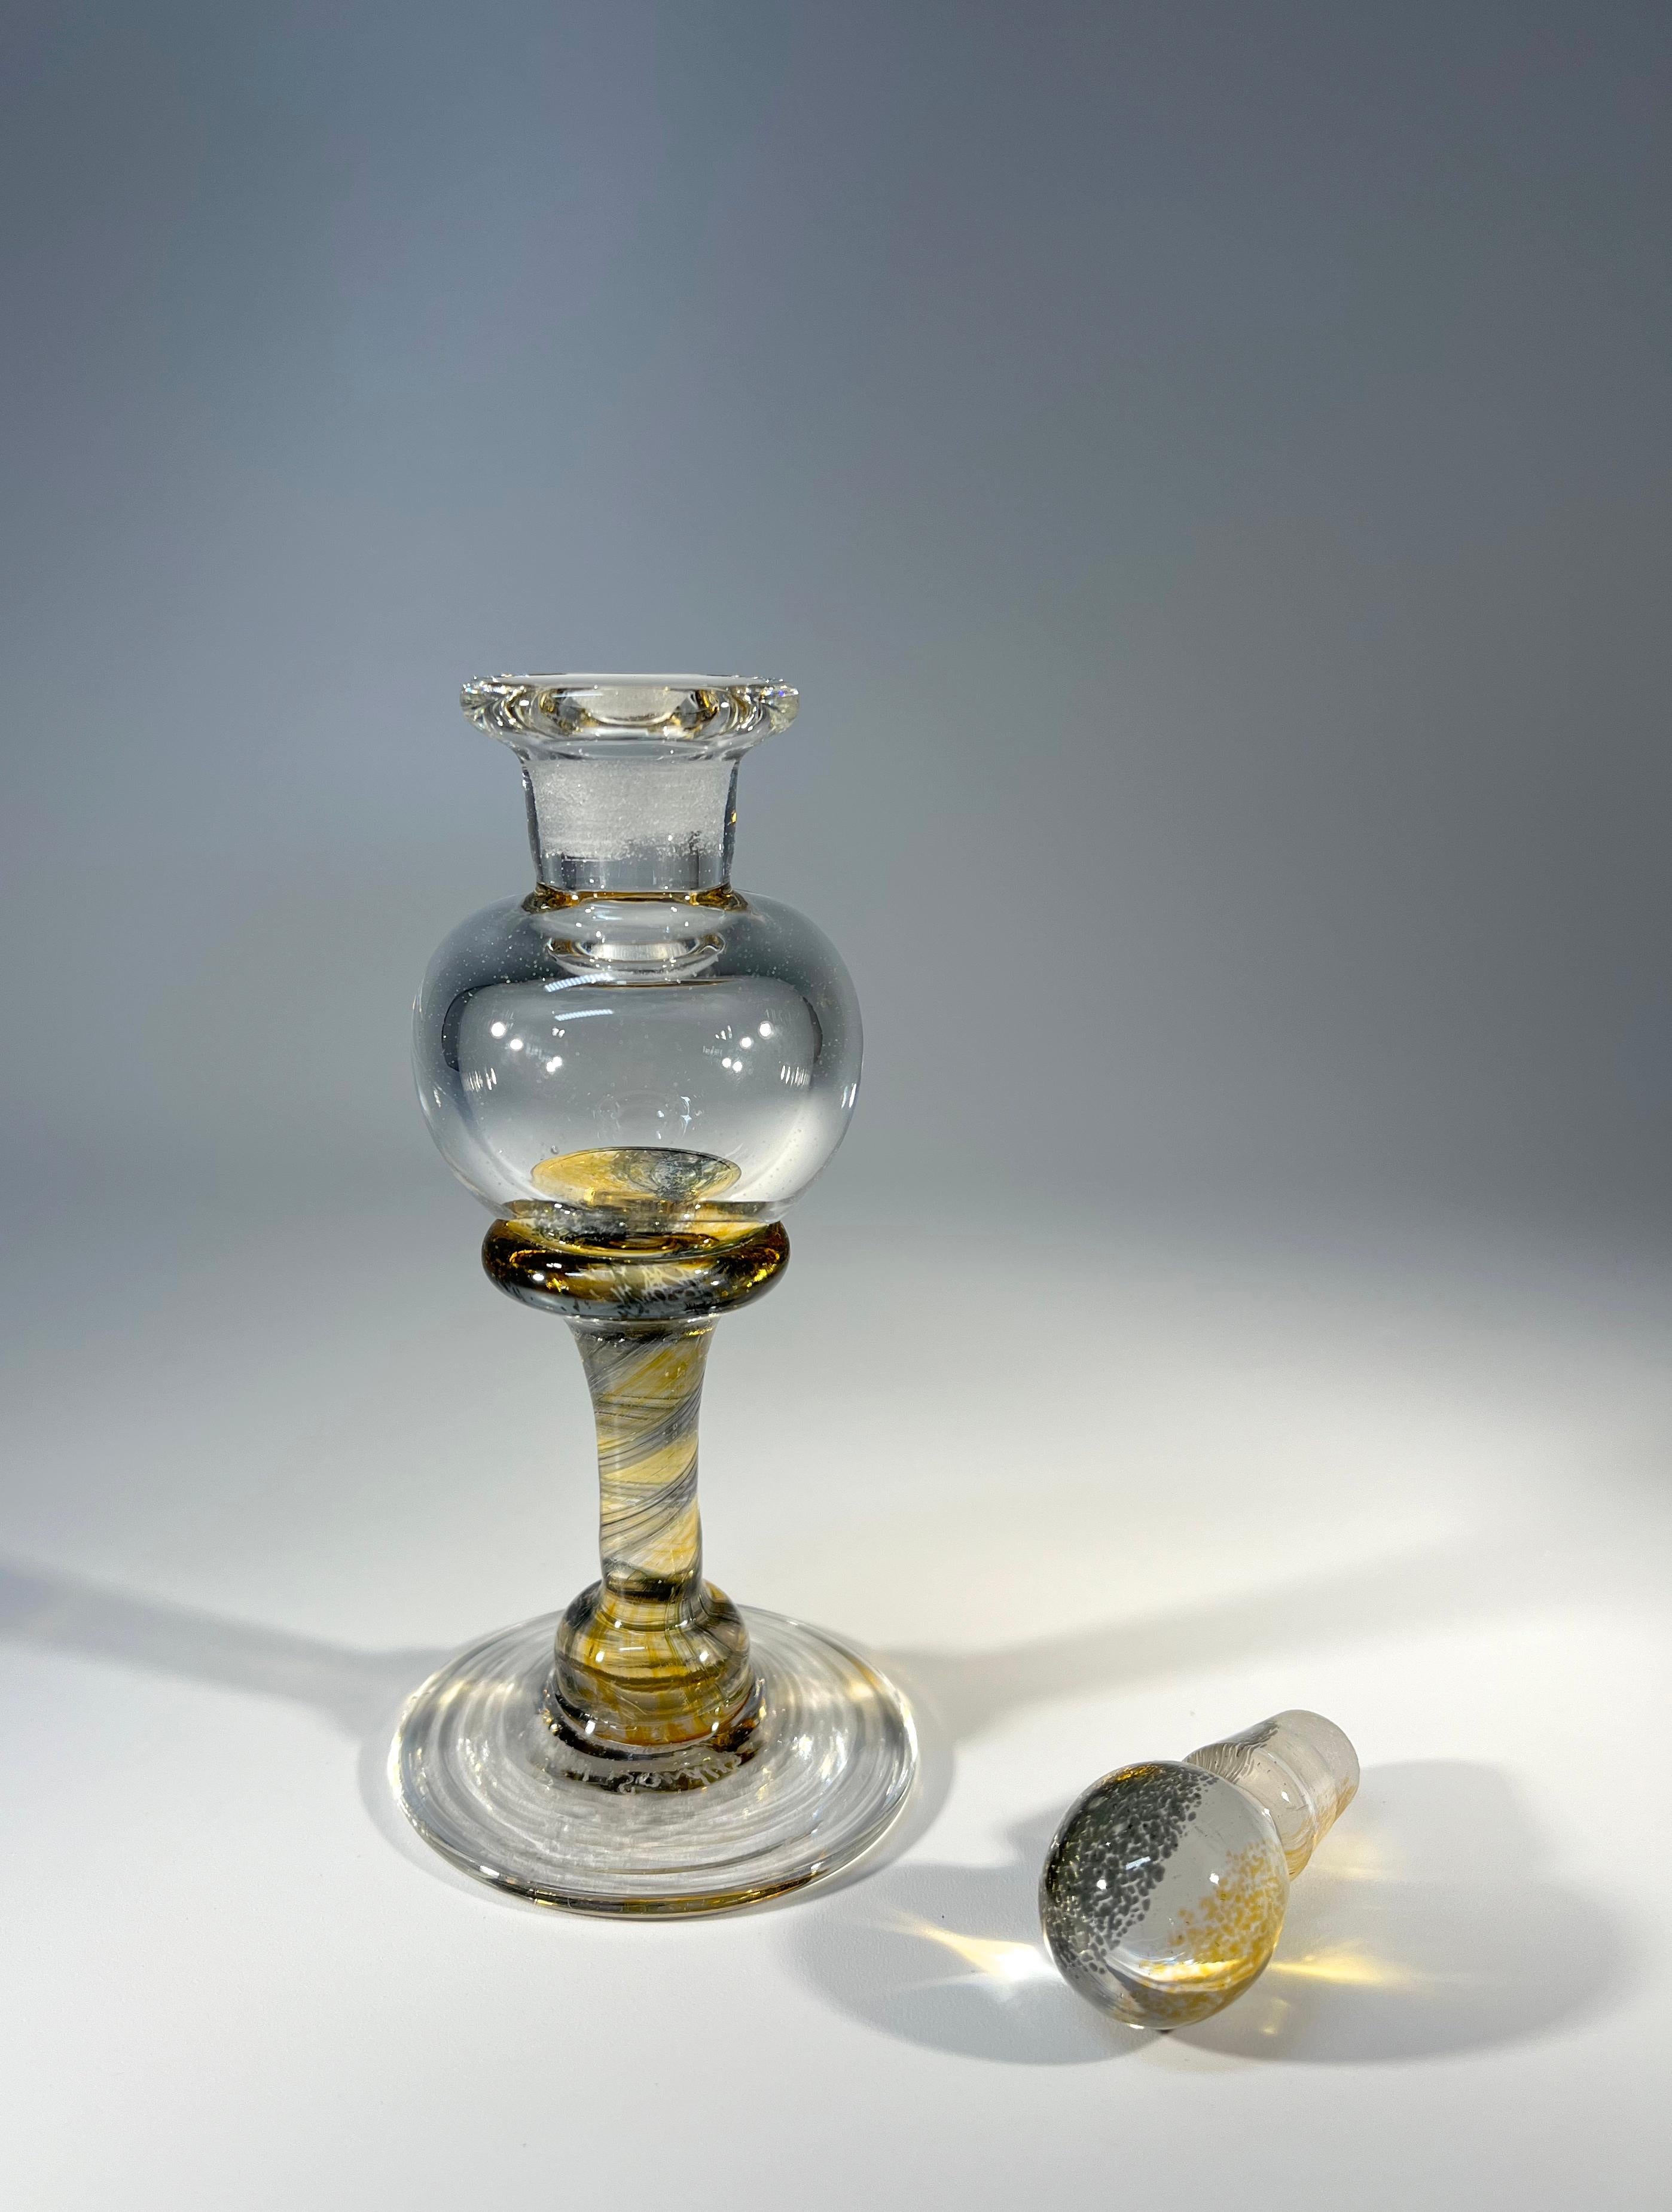 Honey Spiral Twist Stemmed, English Glass Perfume Bottle By Andrew Sanders c1980 In Excellent Condition For Sale In Rothley, Leicestershire